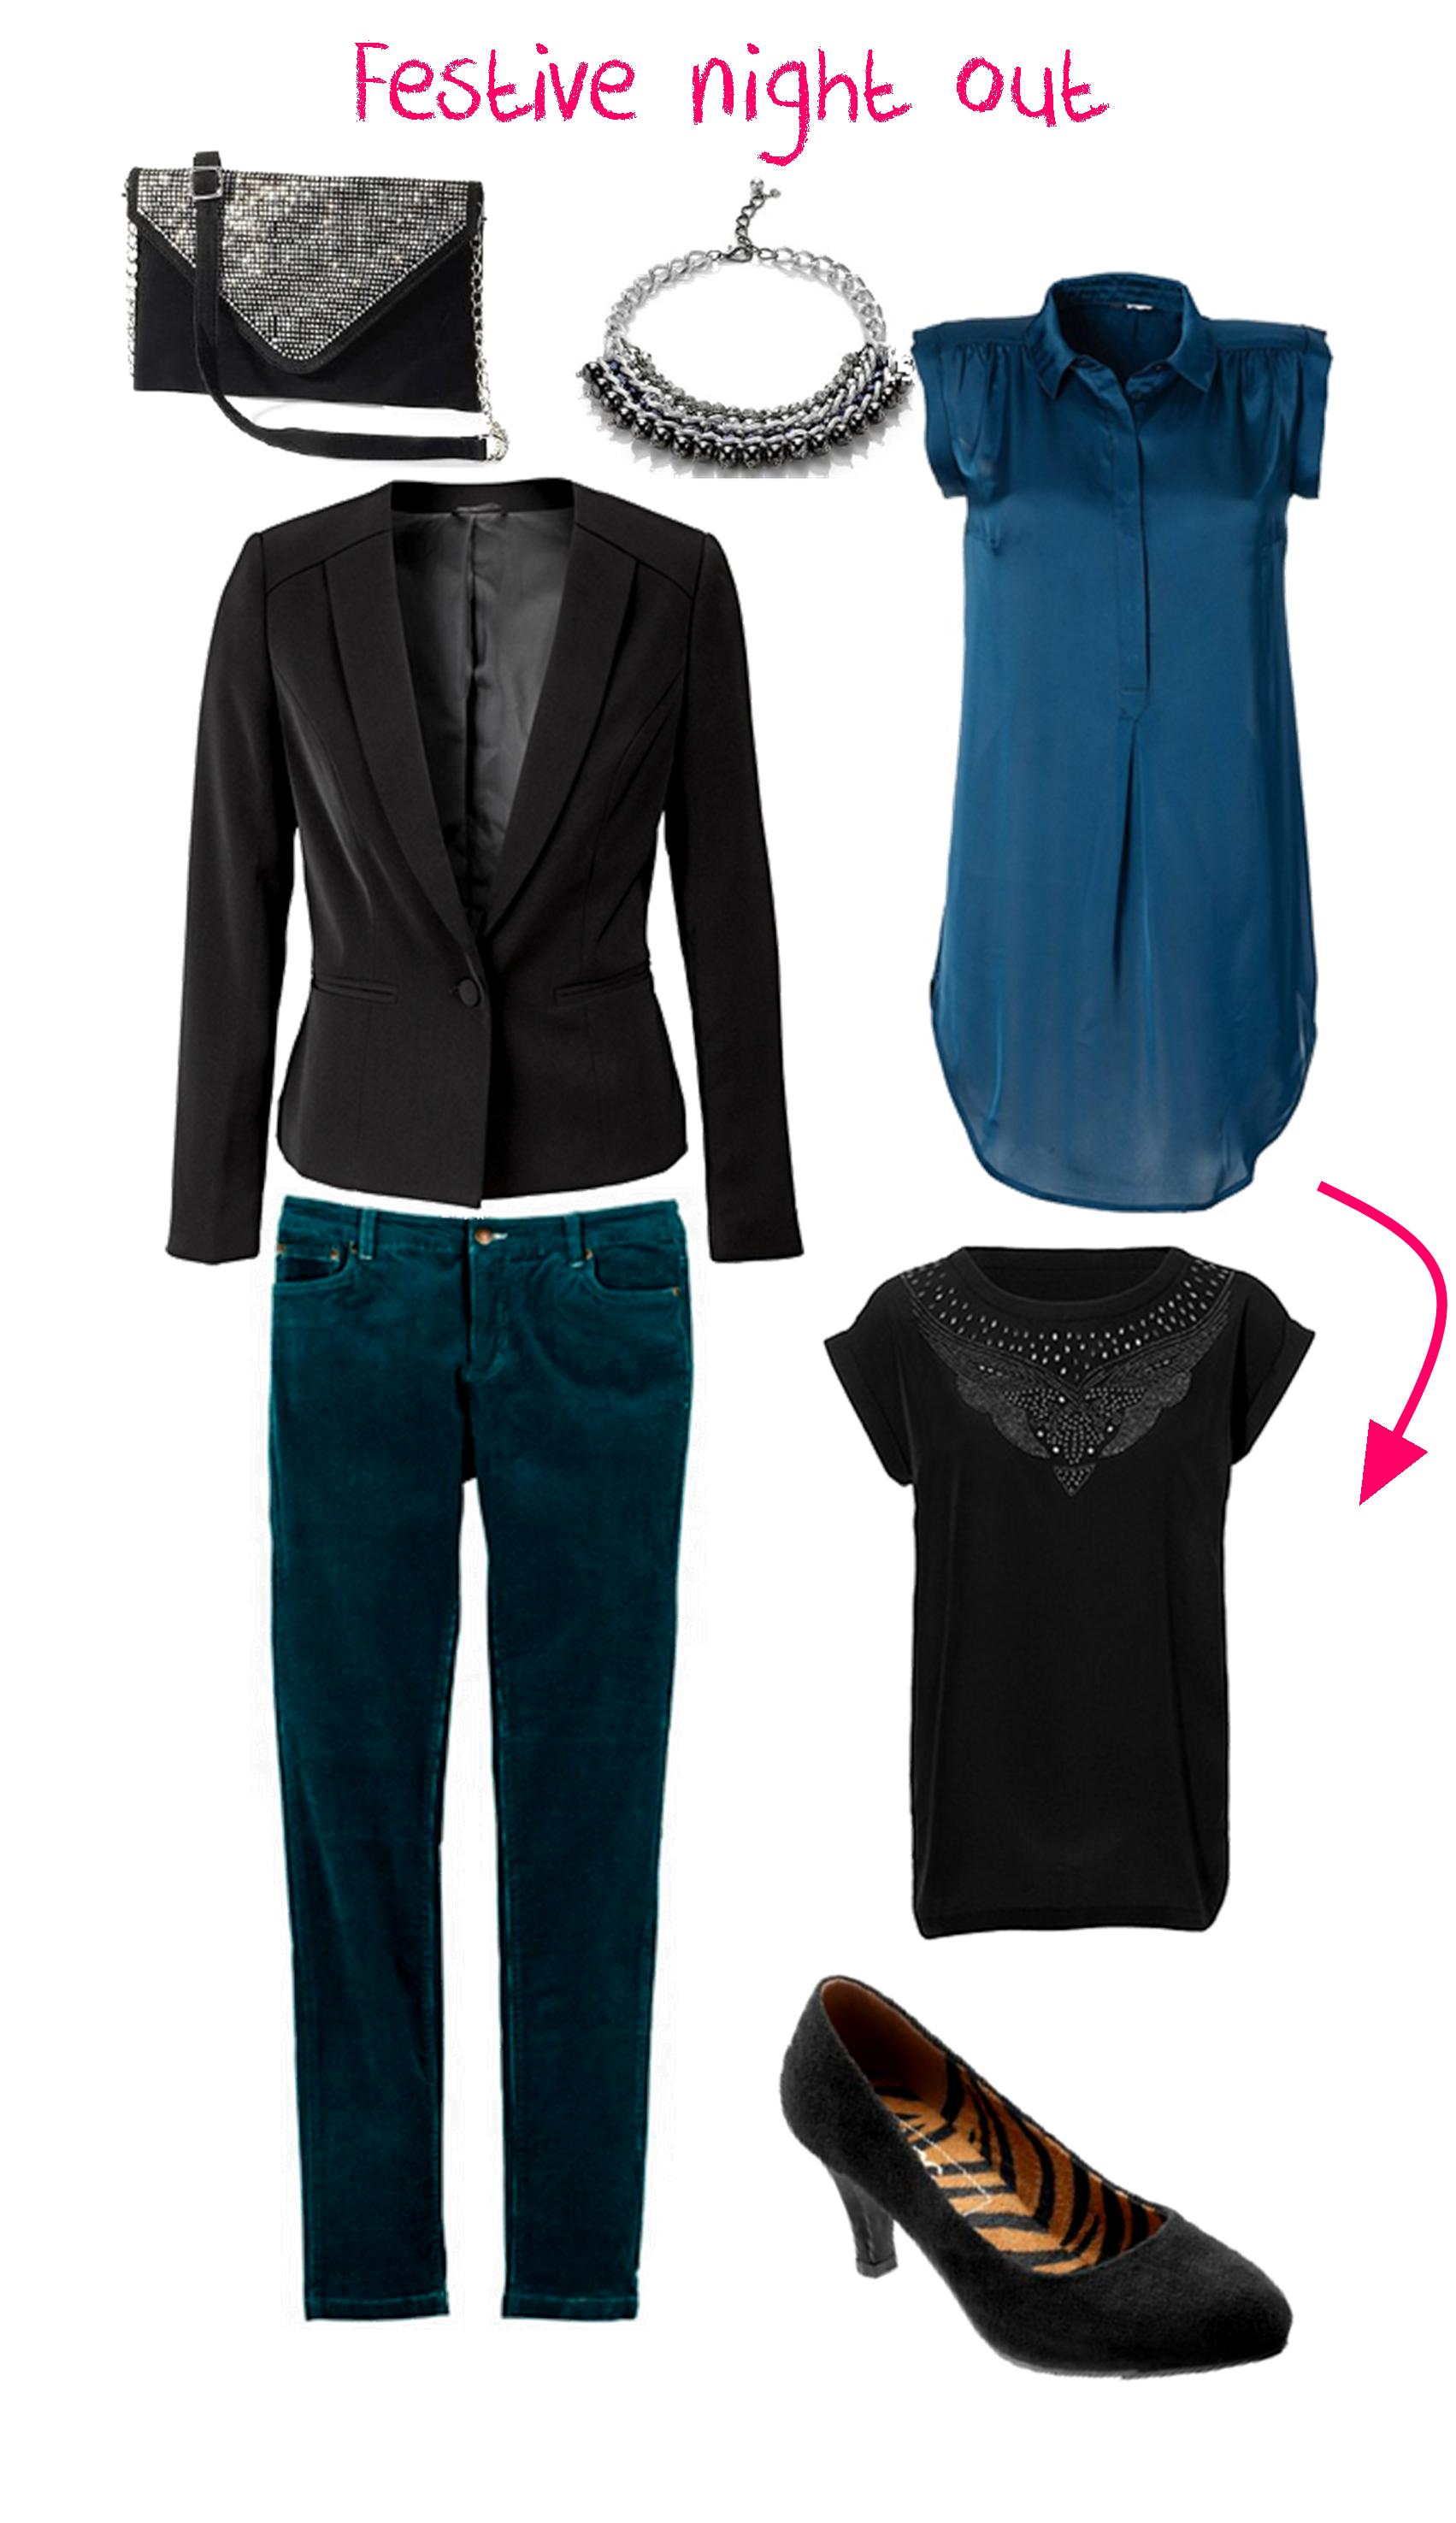 my favourite teal jeans reworked for winter 2013 evening out festive party - my look book using bon prix clothes